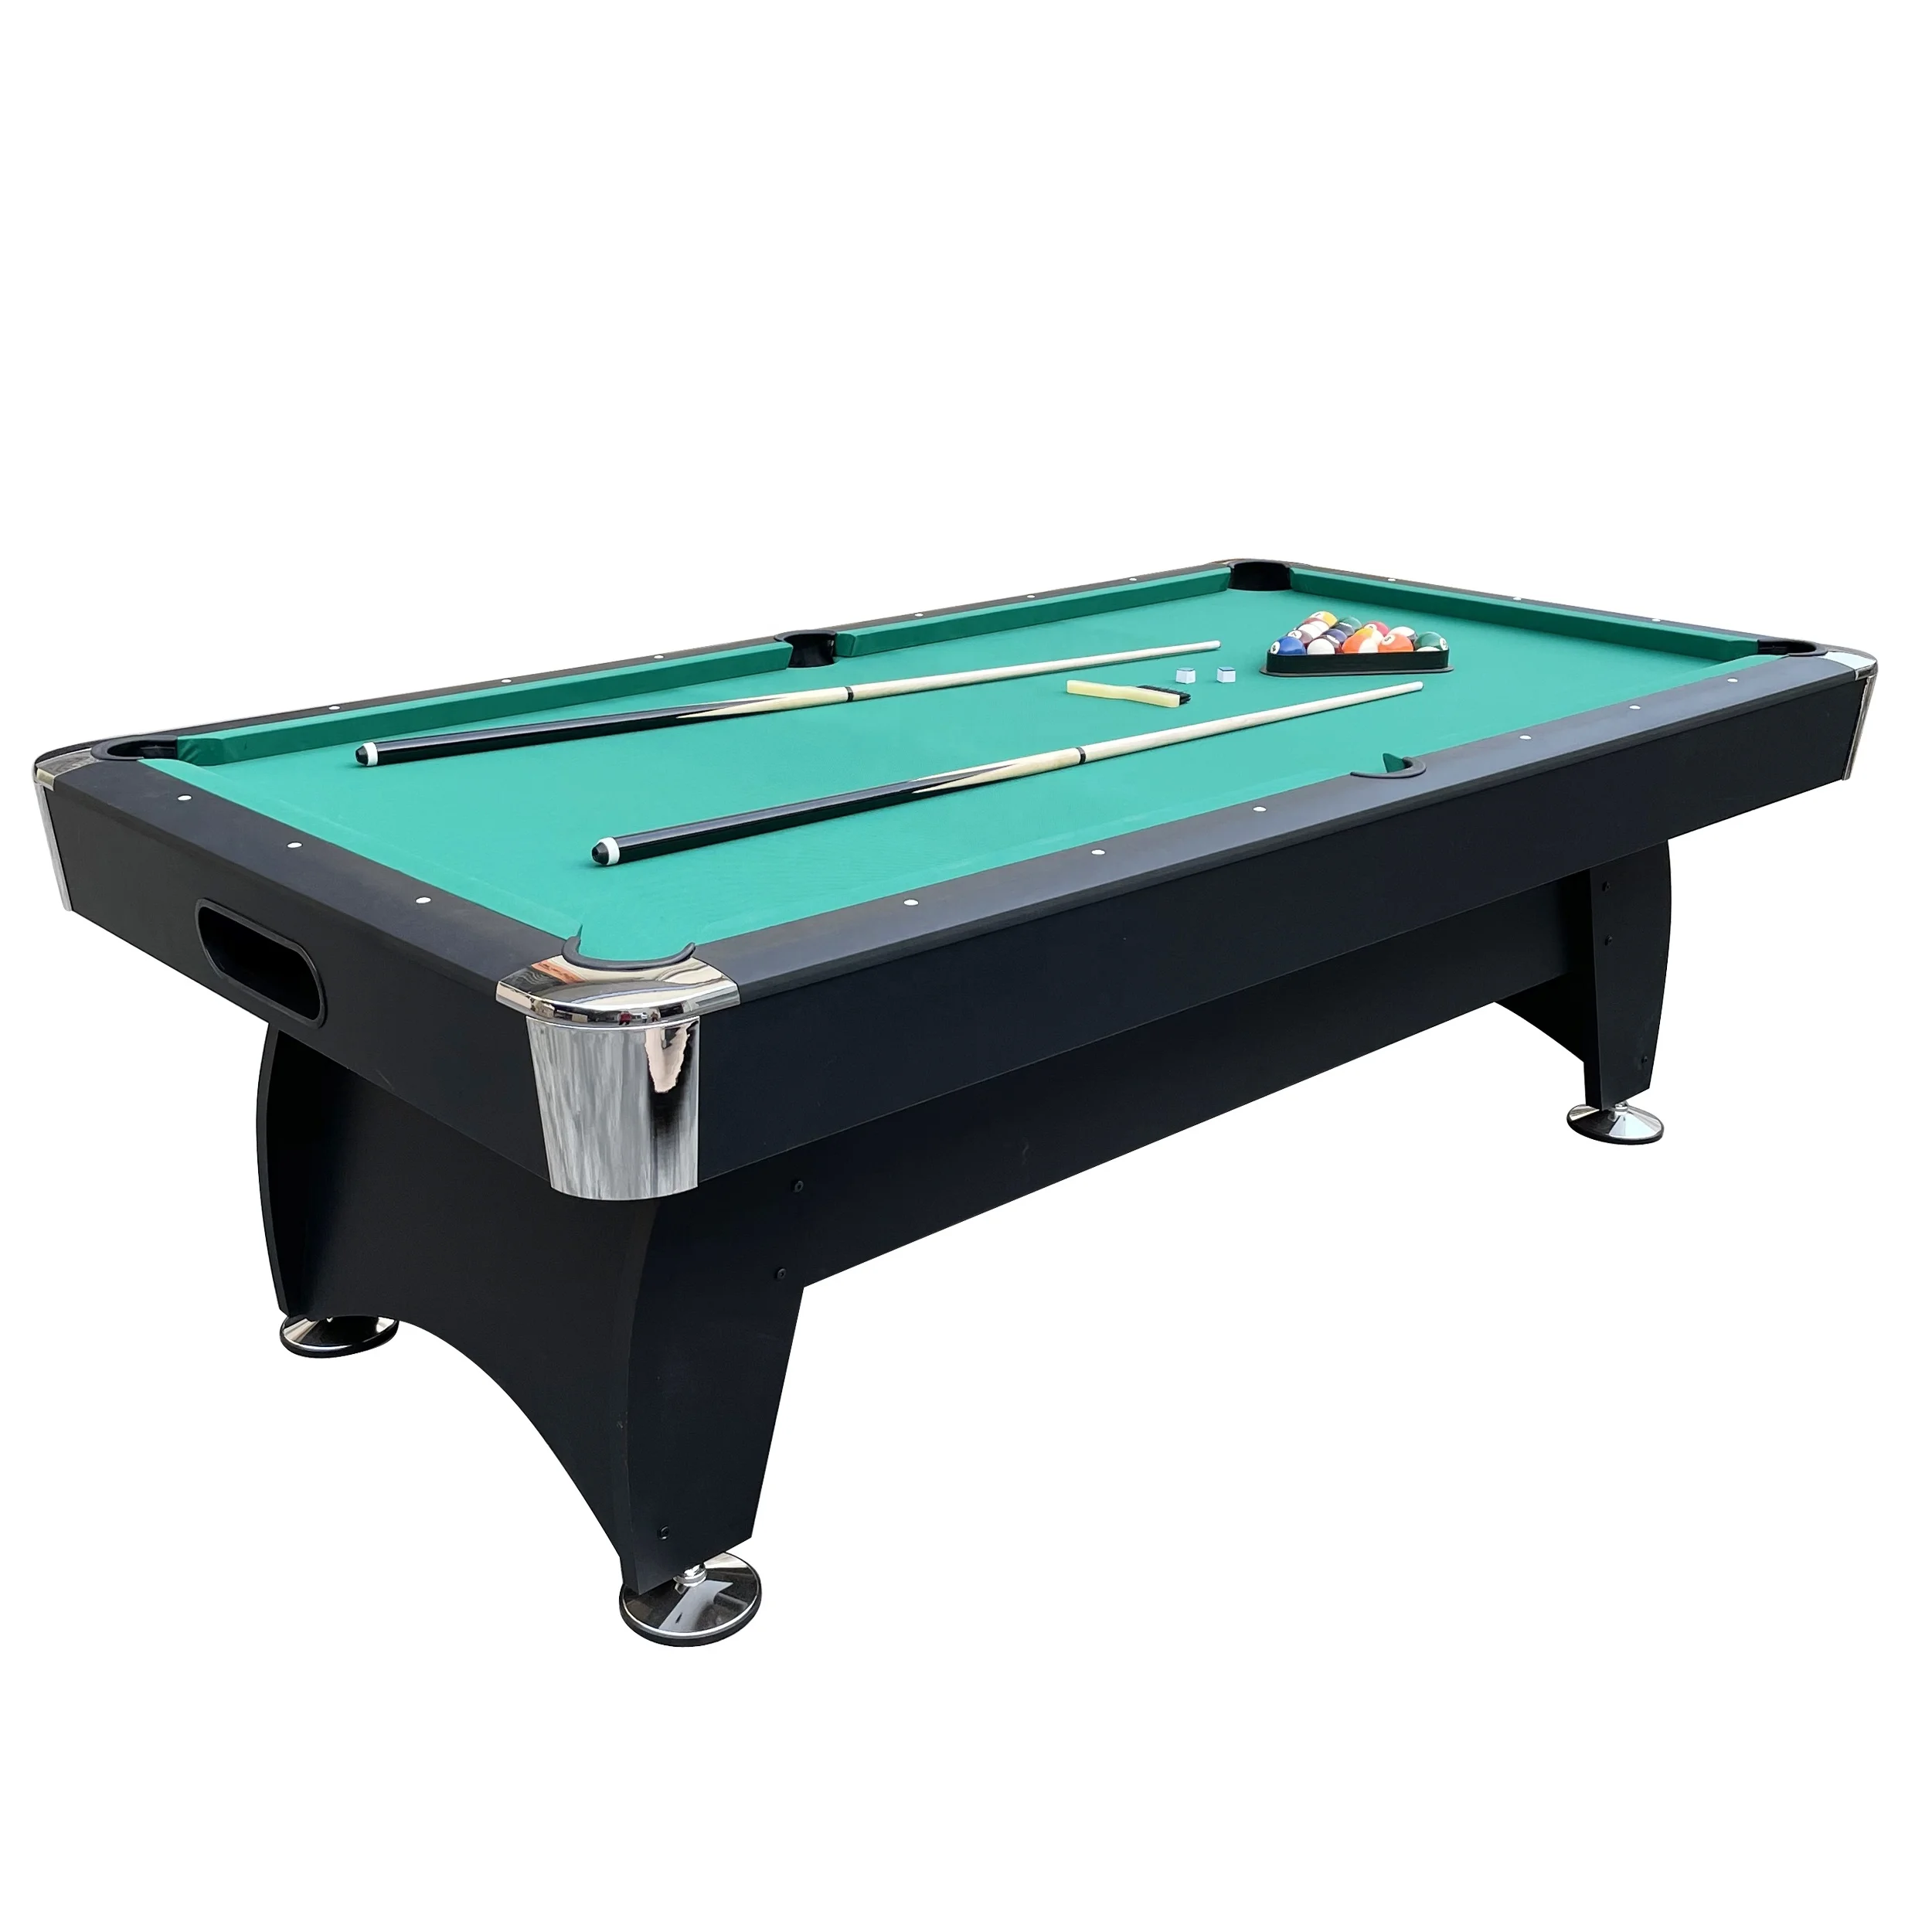 New designed 84 inch 7ft  Billiard & Snooker Pool game table  with all accessories in Green Blue color TP-8406 TP-8407 3 5 inch com35h3p44ulc 480×640 resolution rgb vertical stripe sunlight readable designed for industrial lcd display replacement